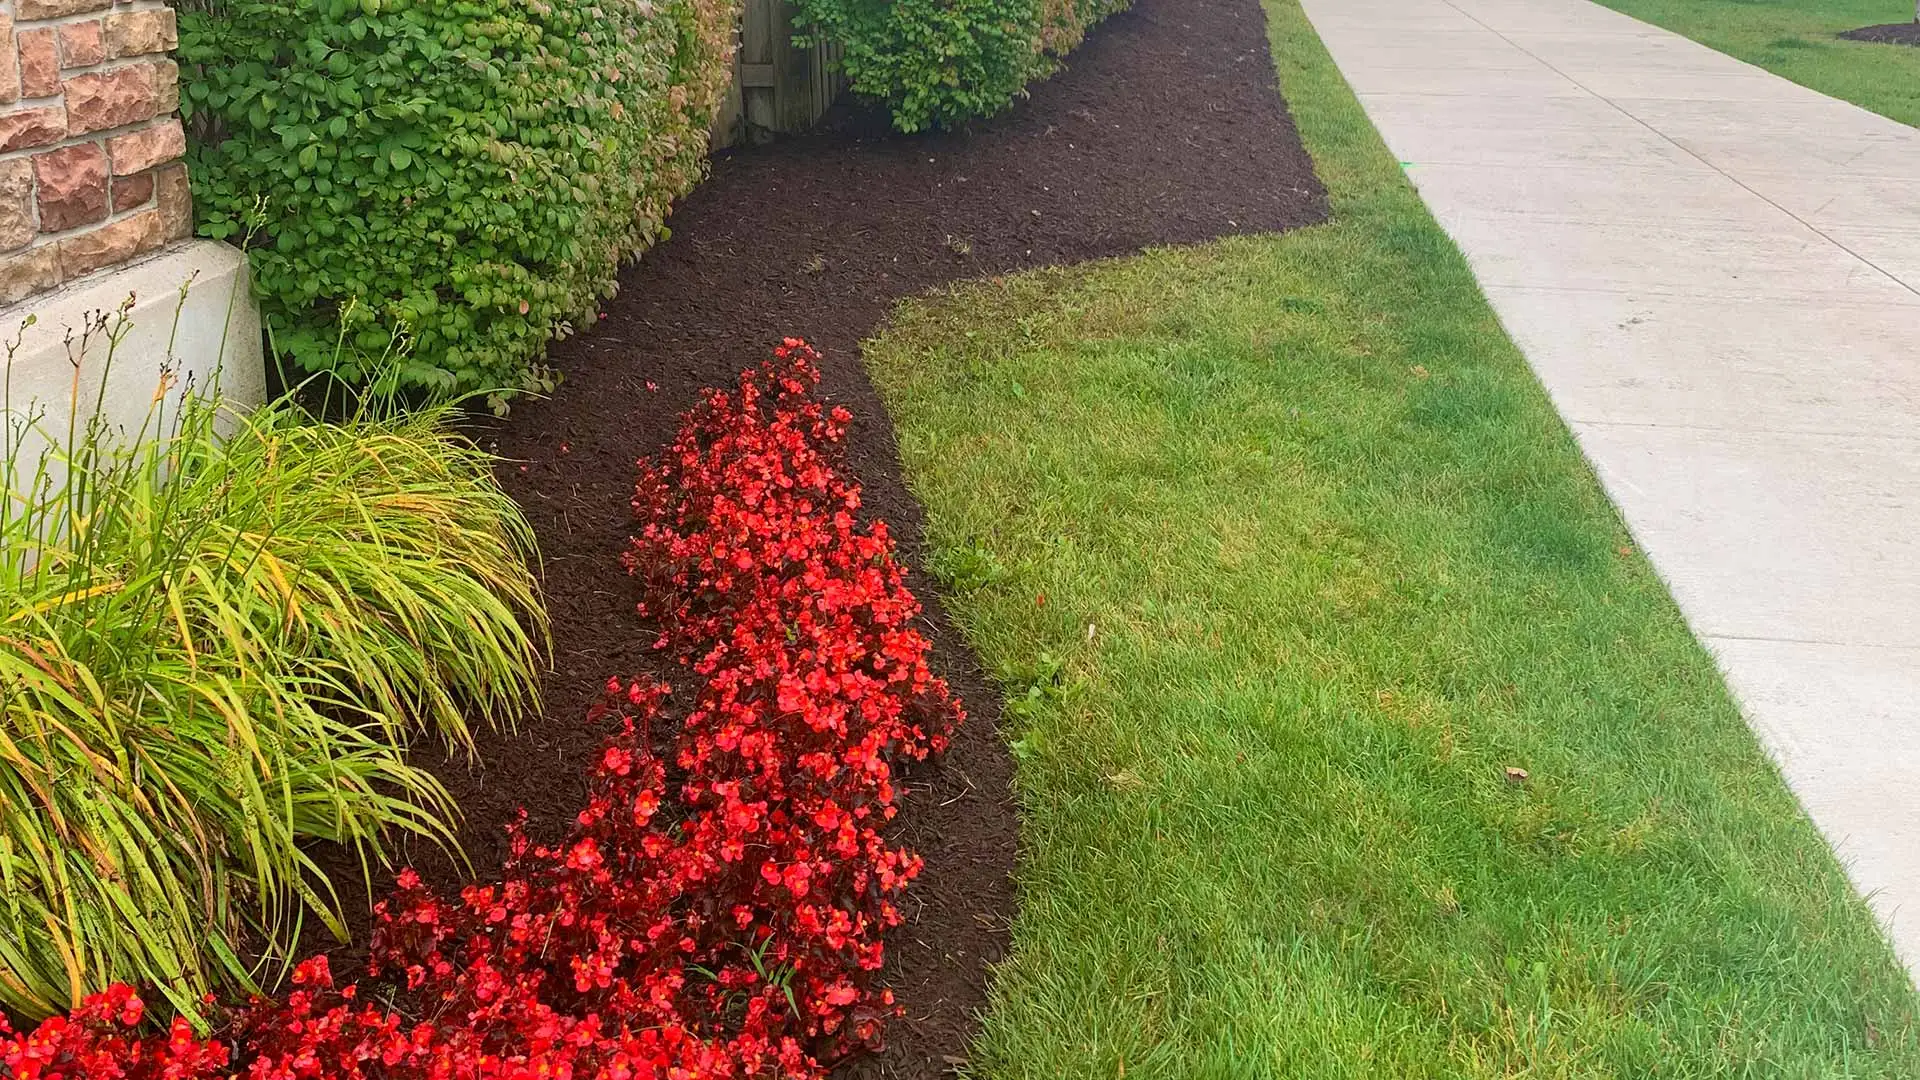 Fresh mulch installation in a commercial landscape bed near Macomb, MI.